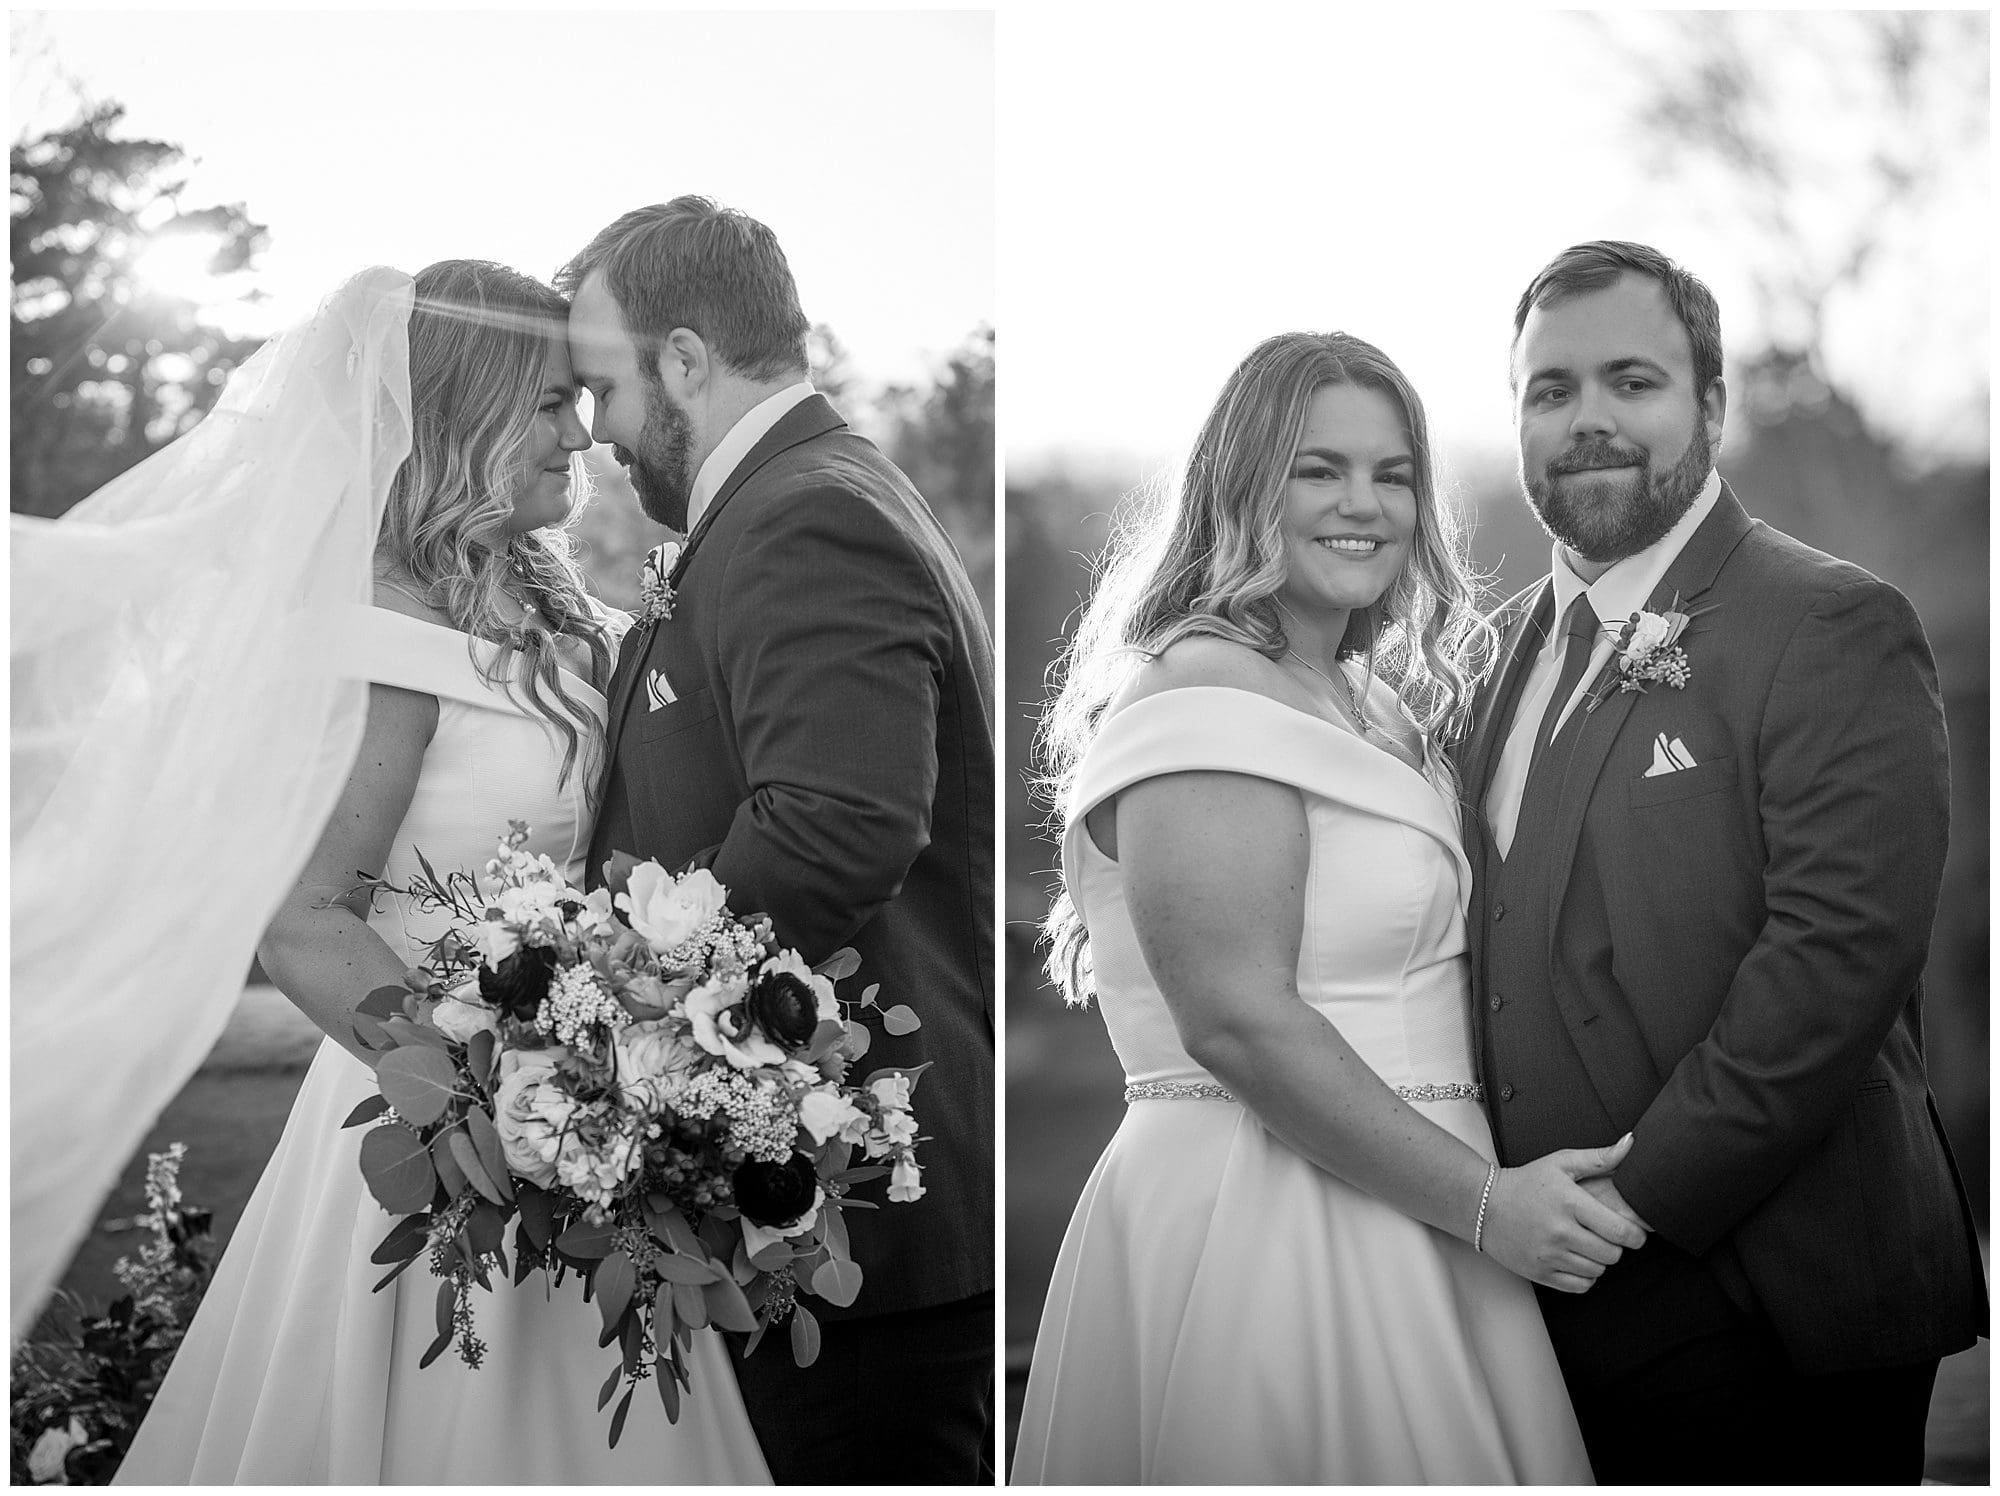 Two black and white photos of a bride and groom.